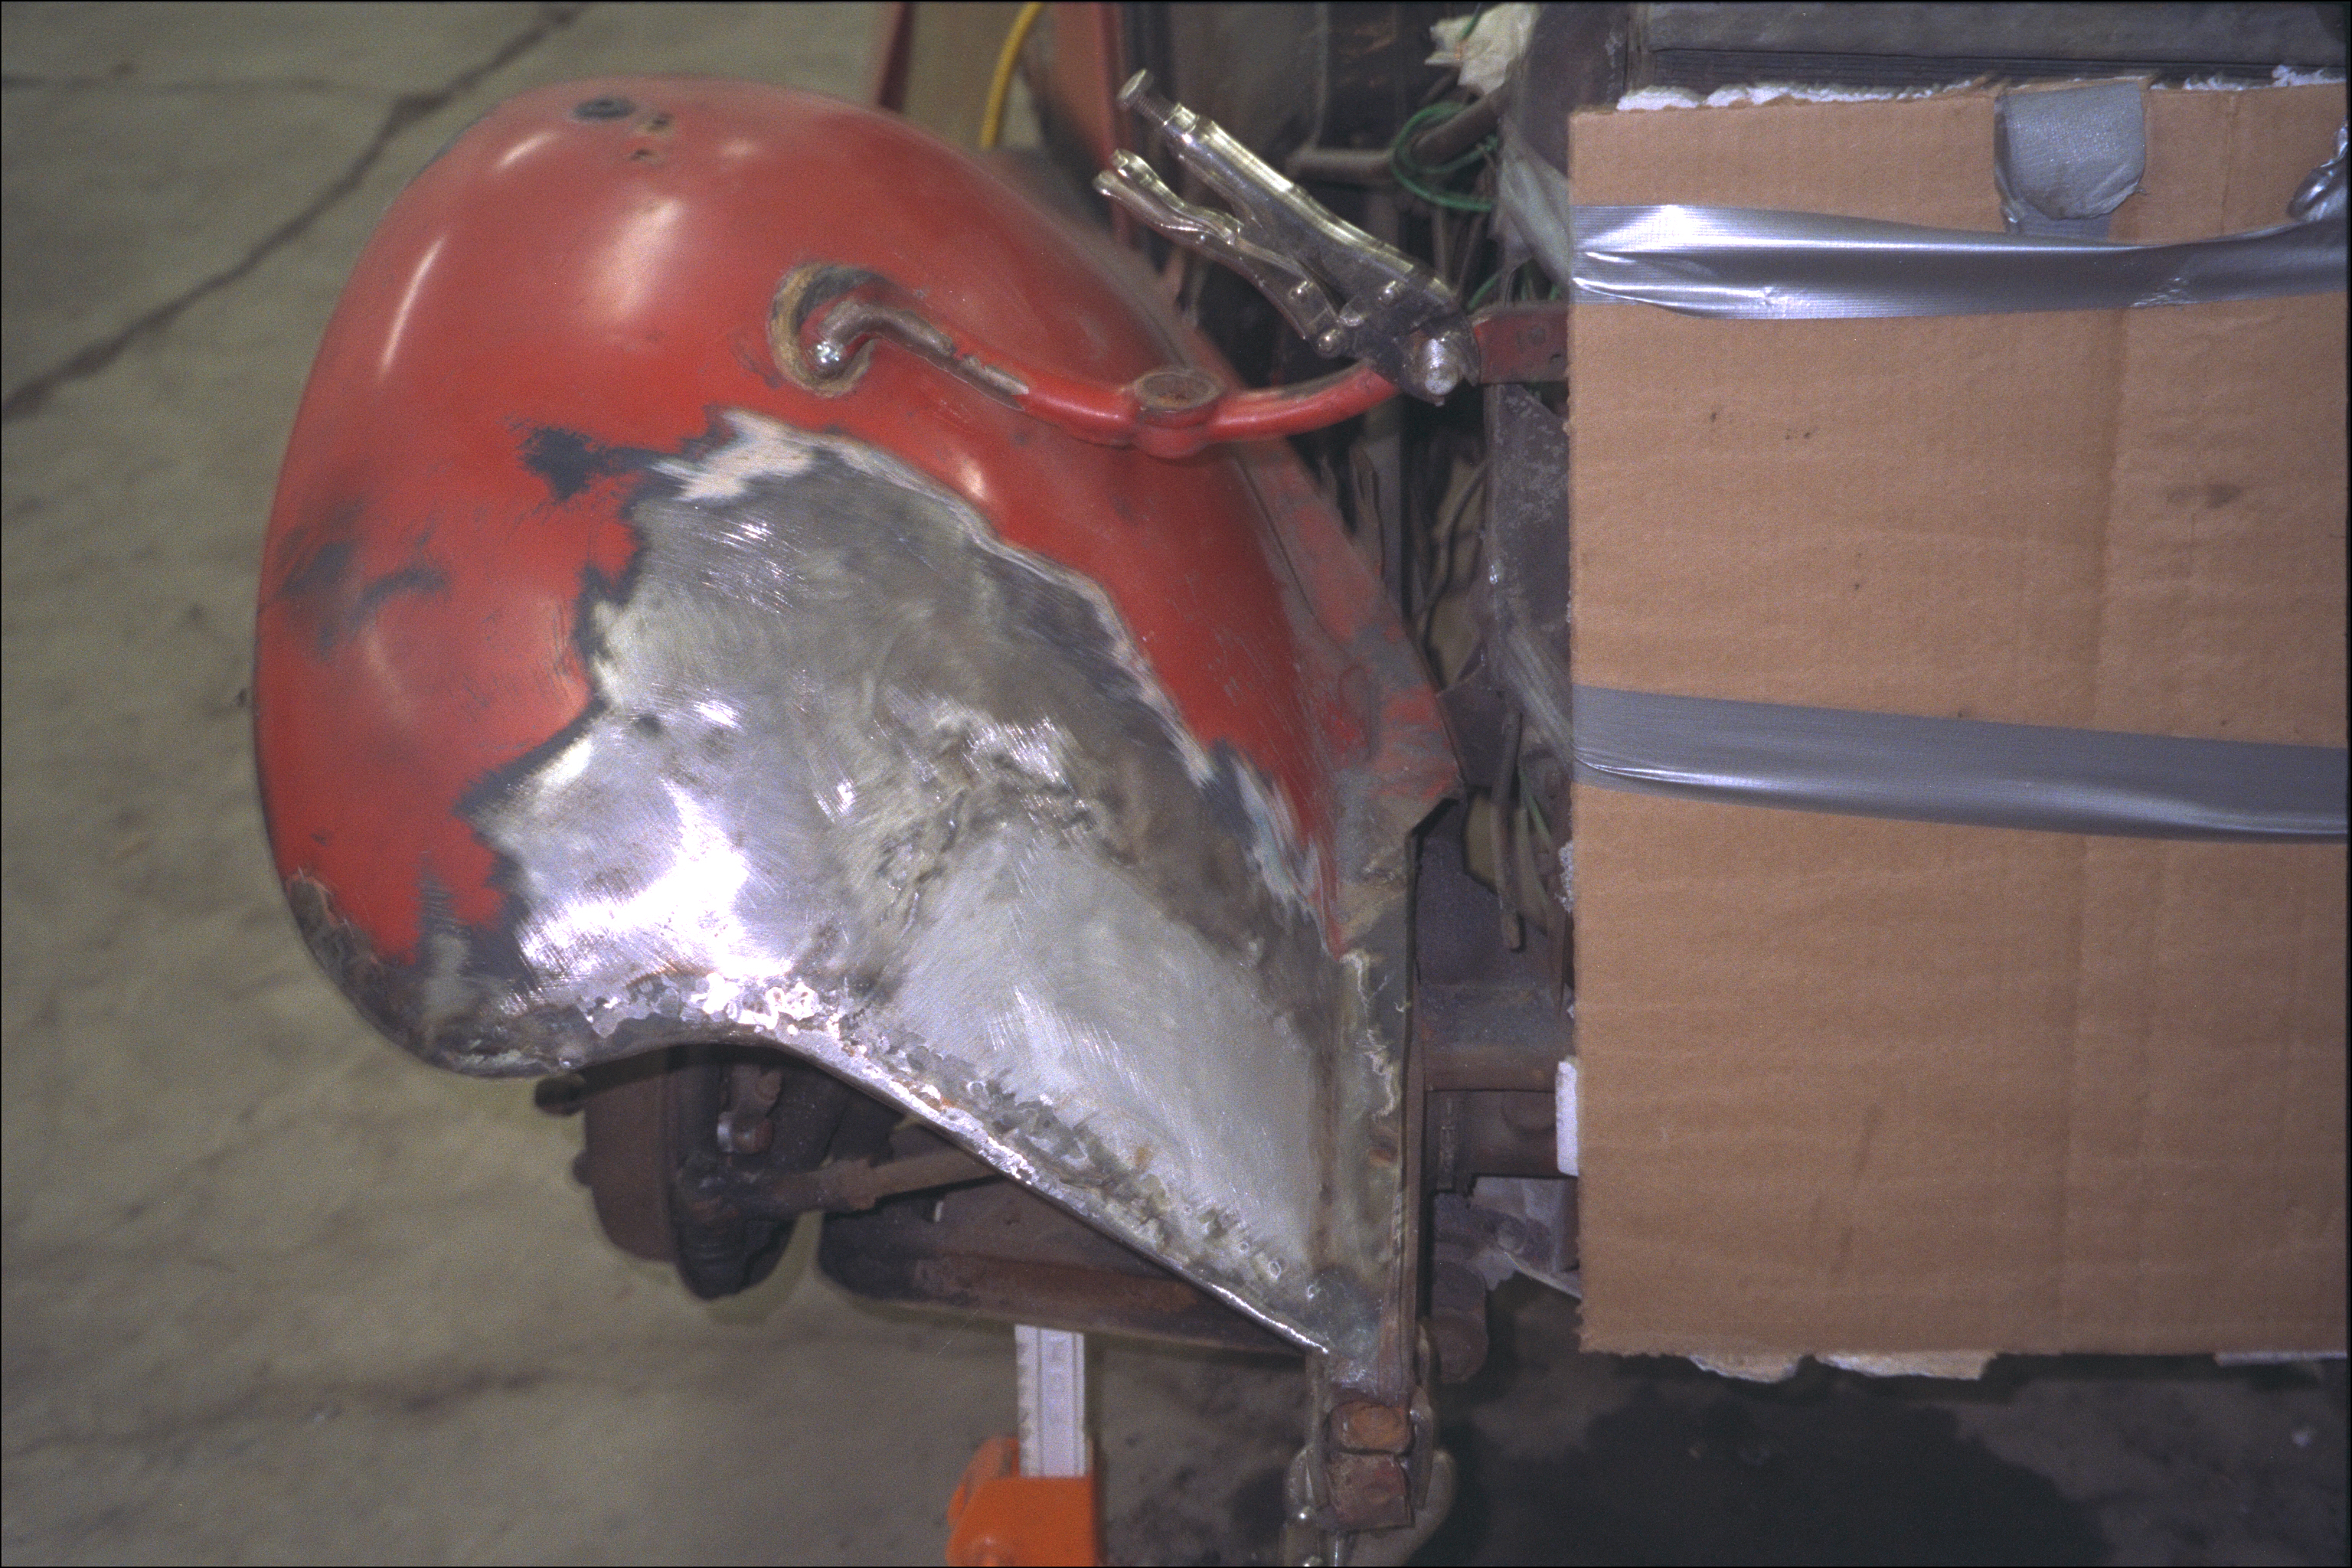 Repair of right front fender tear